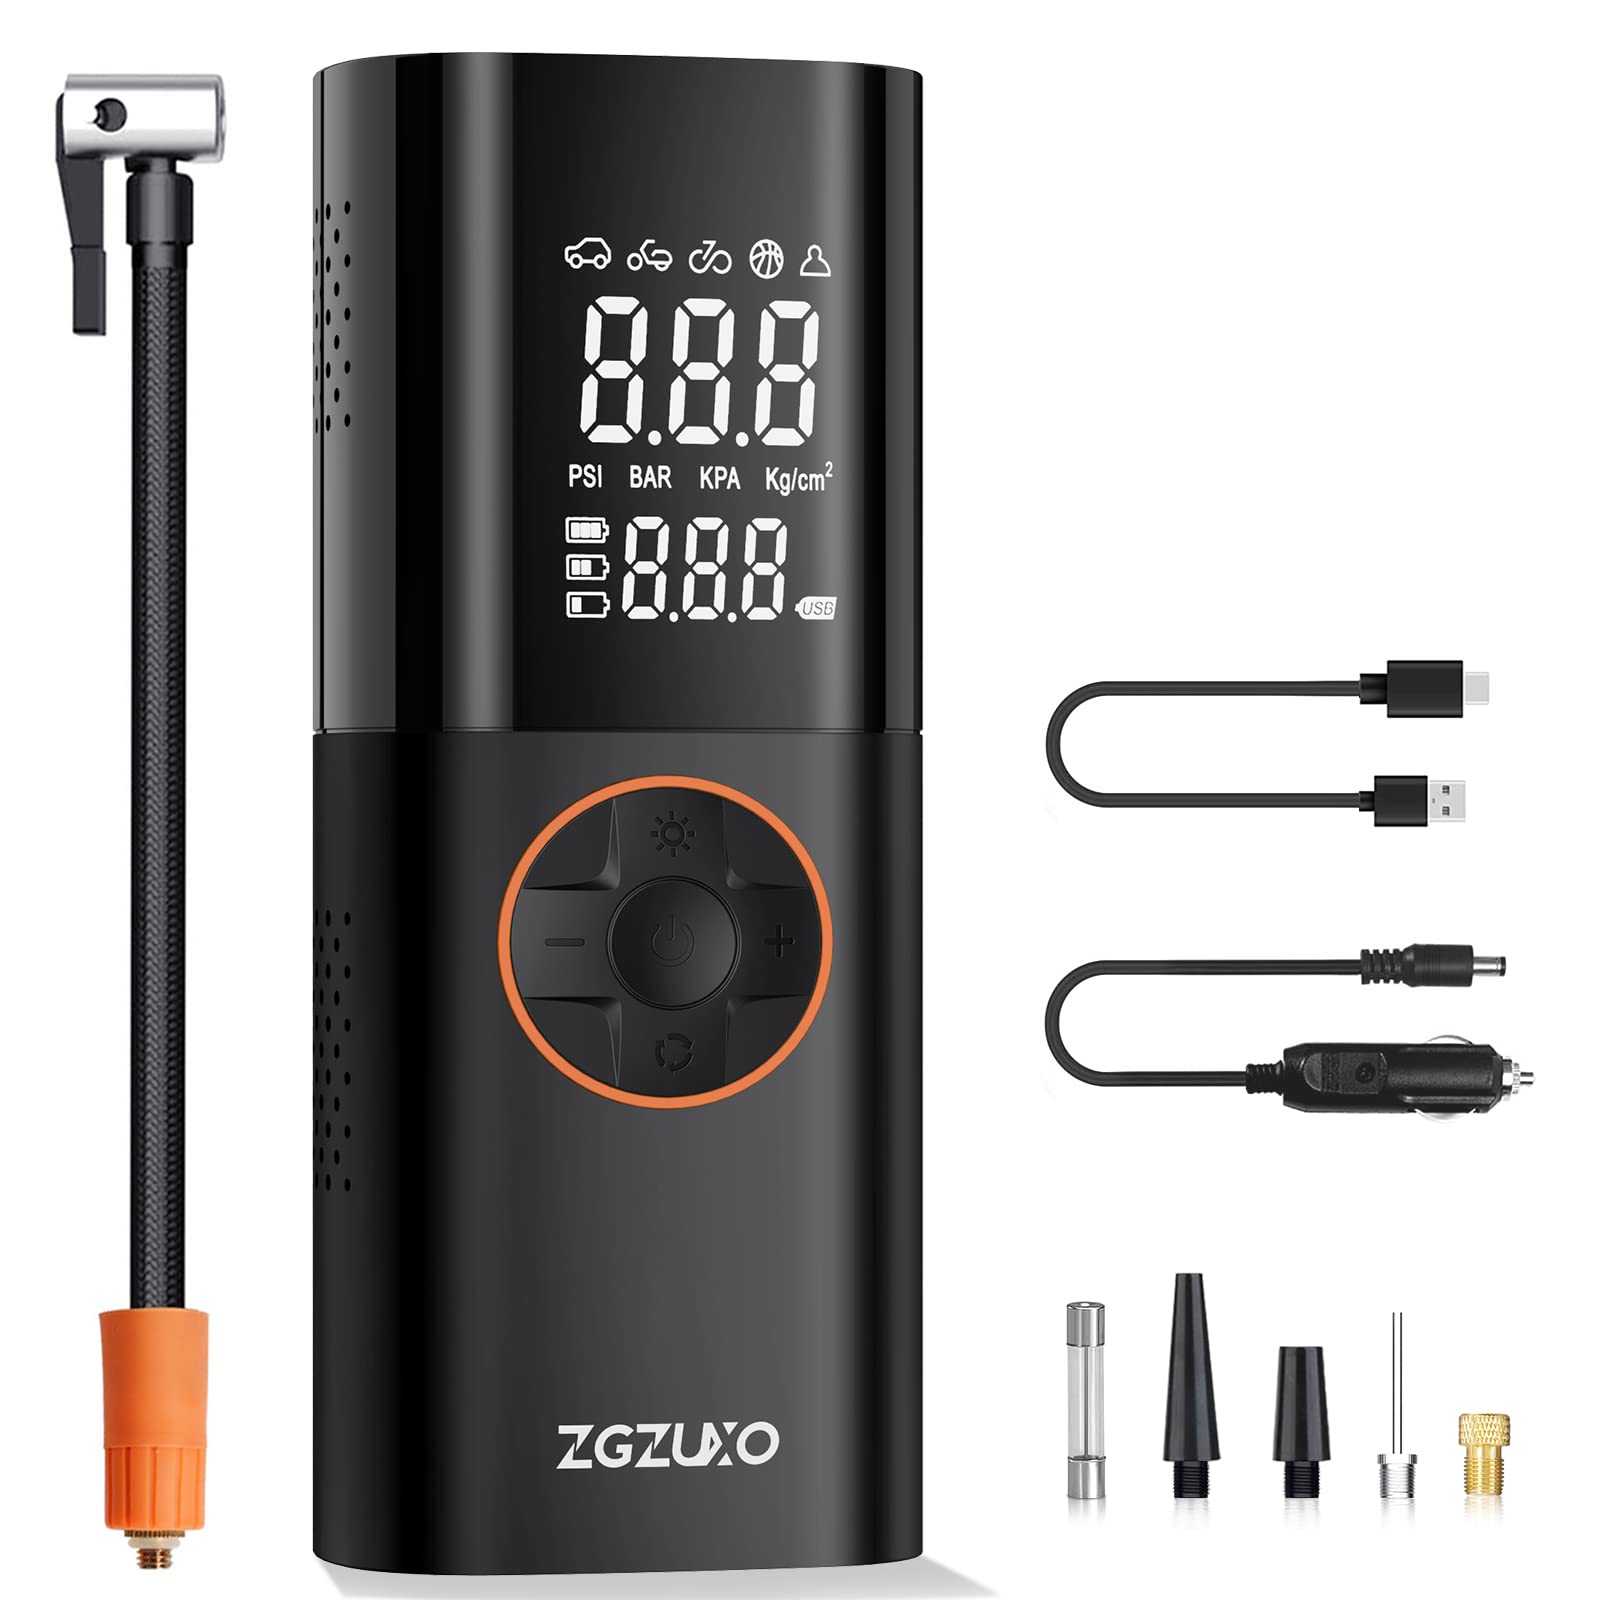 ZGZUXO Tire Inflator Portable Air Compressor, 2X Fast Cordless Air Pump 7800mAh Battery & 12V DC Dual Power Electric Tire Pump 150PSI with LCD Dual Screen for Car Motorcycle Bike Ball, Car Accessories